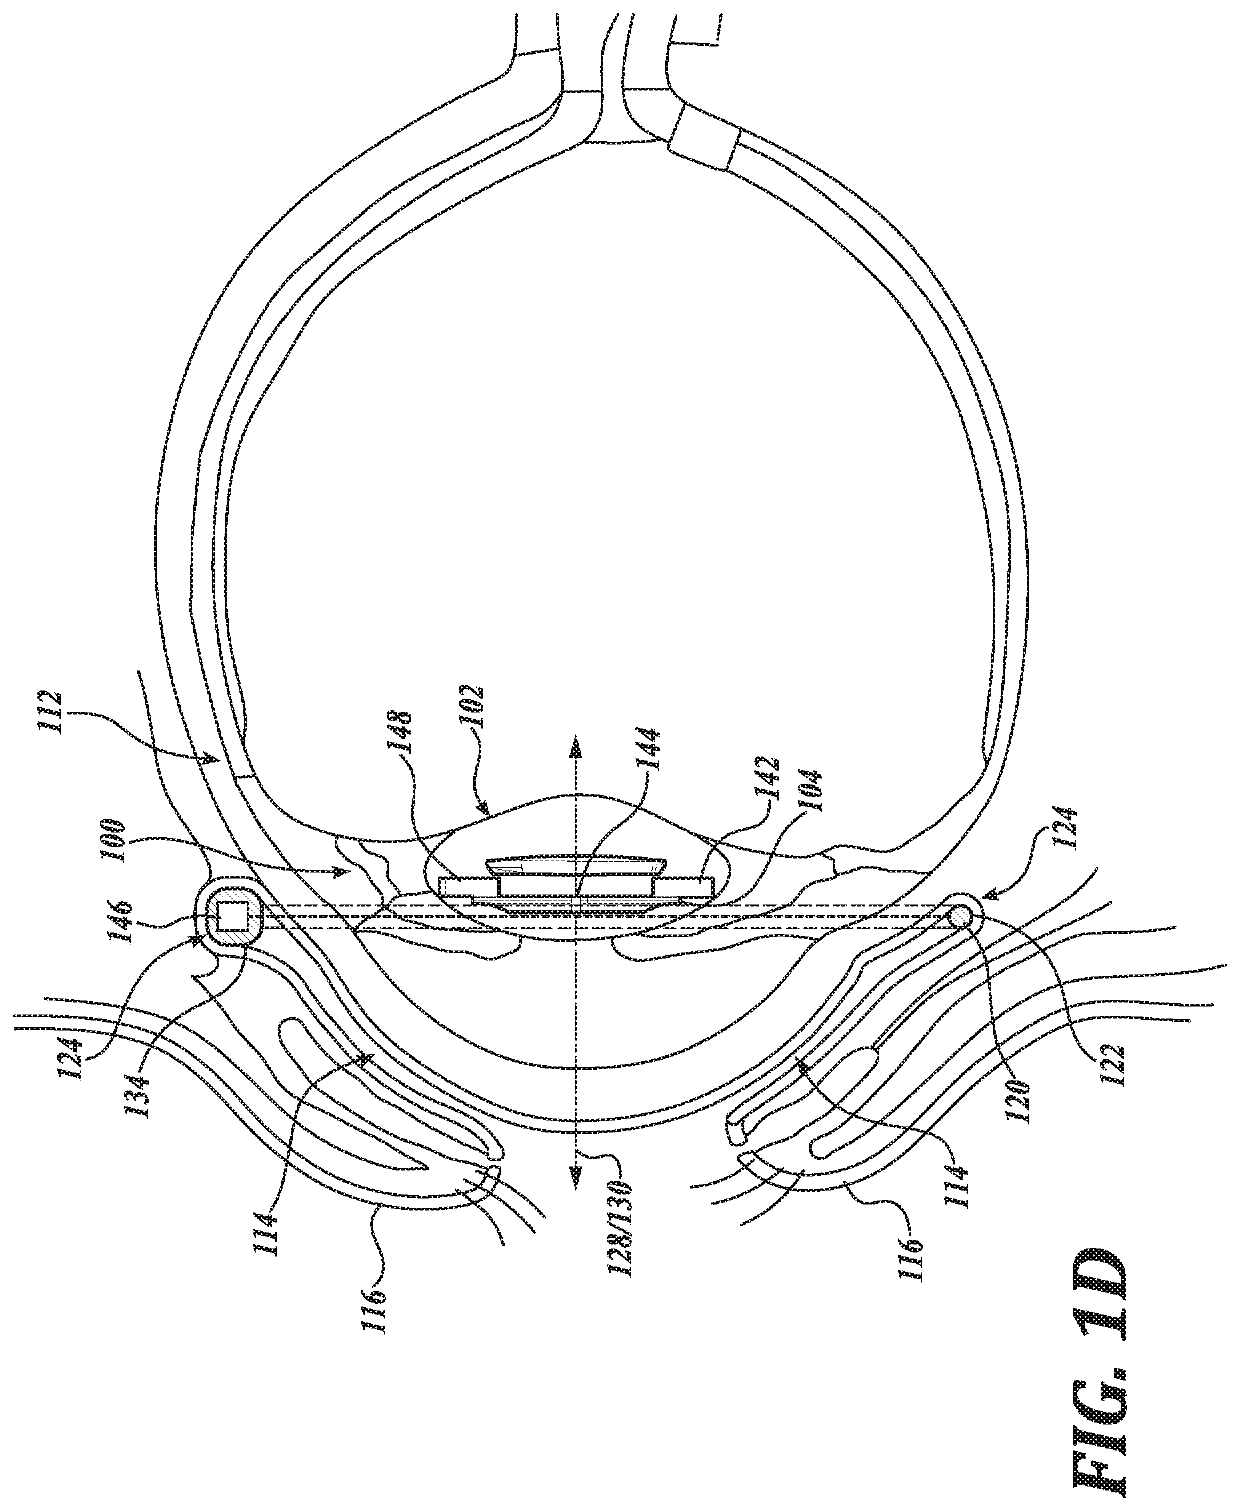 Ophthalmic system including accommodating intraocular lens and remote component and related methods of use